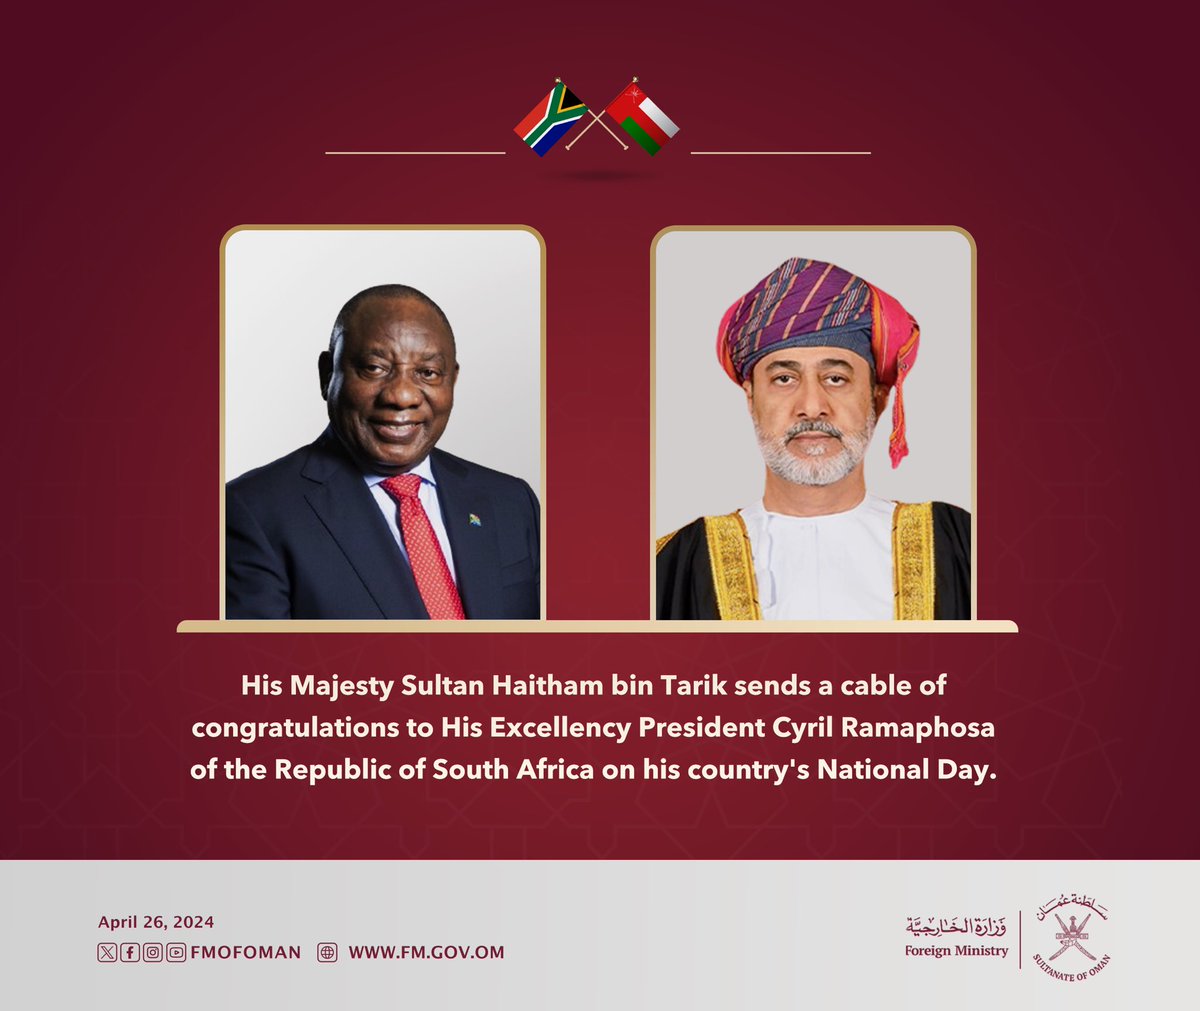 His Majesty the Sultan sends a cable of congratulations to His Excellency President Cyril Ramaphosa of the Republic of #South_Africa on his country's National Day.